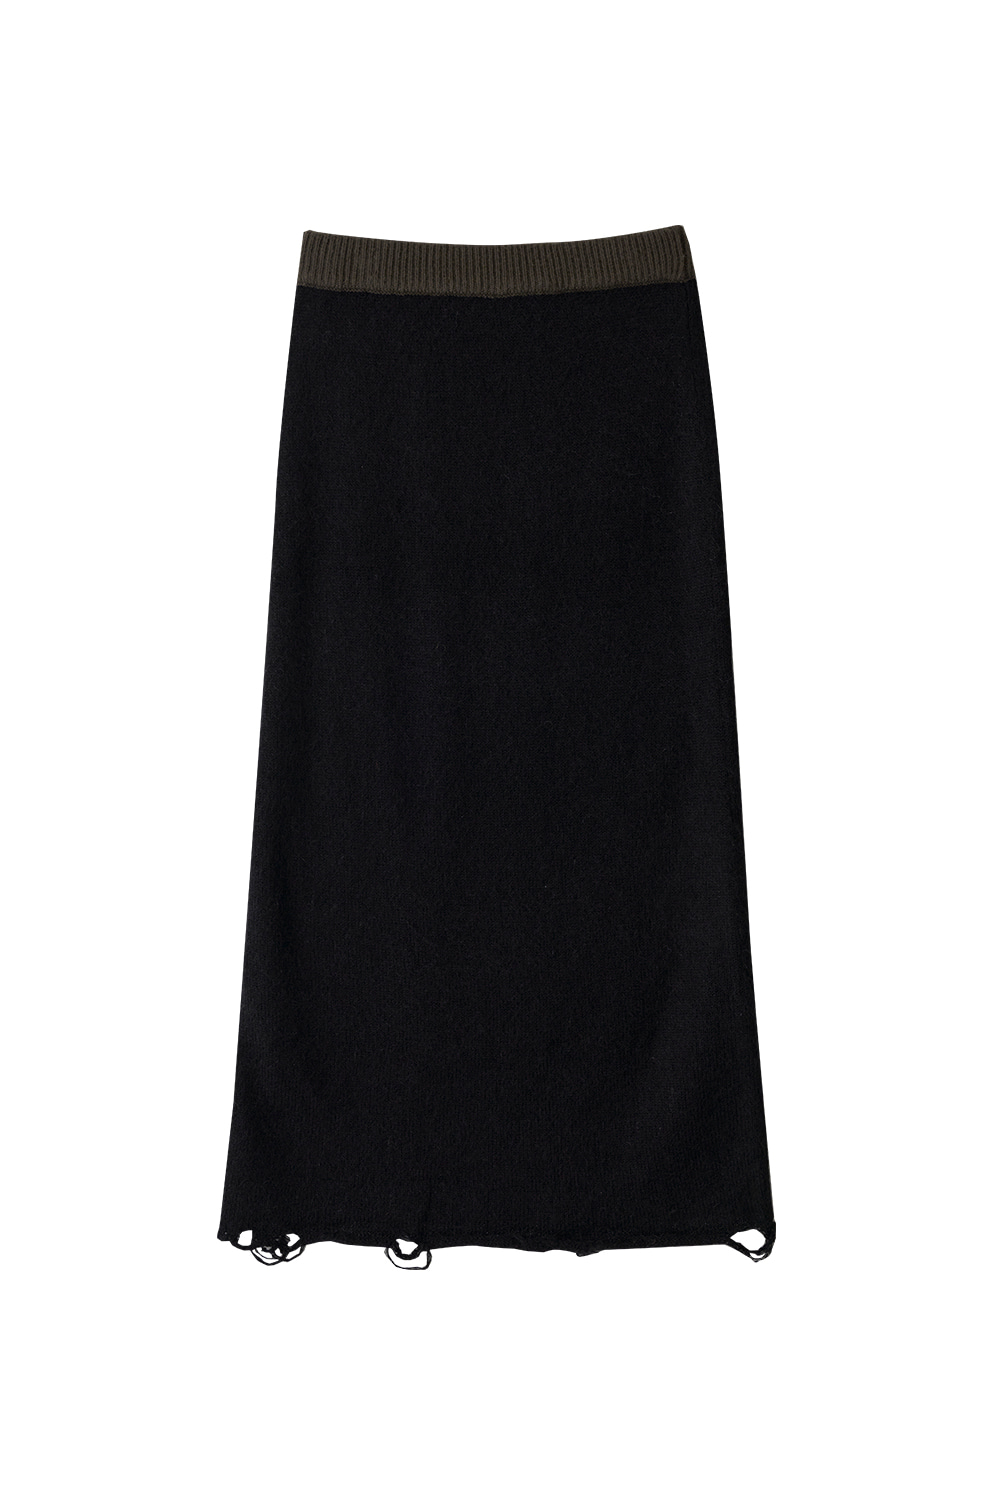 Mohair Destroyed Two tone Knit Skirt (Black)